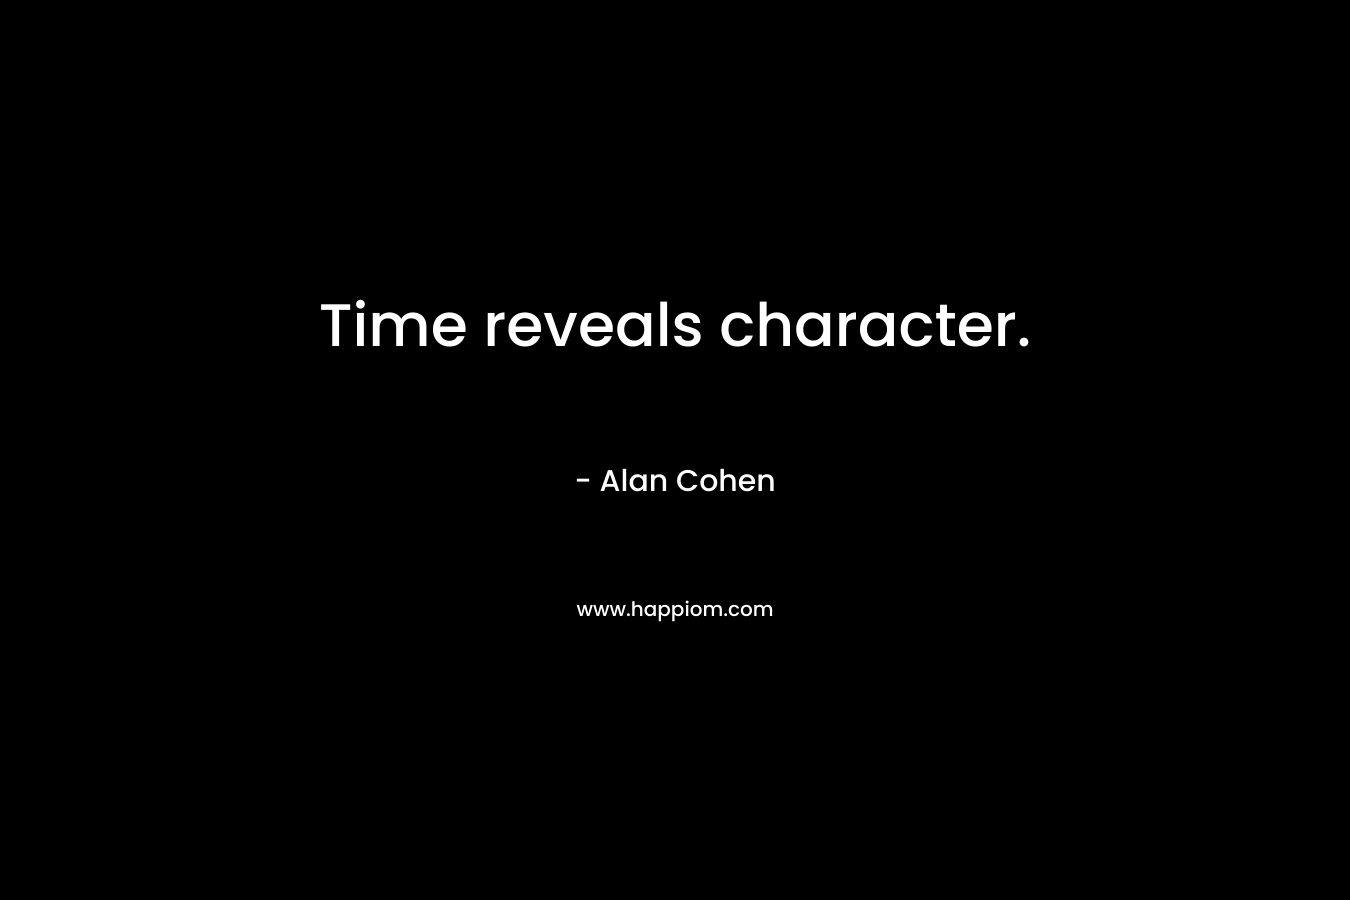 Time reveals character.